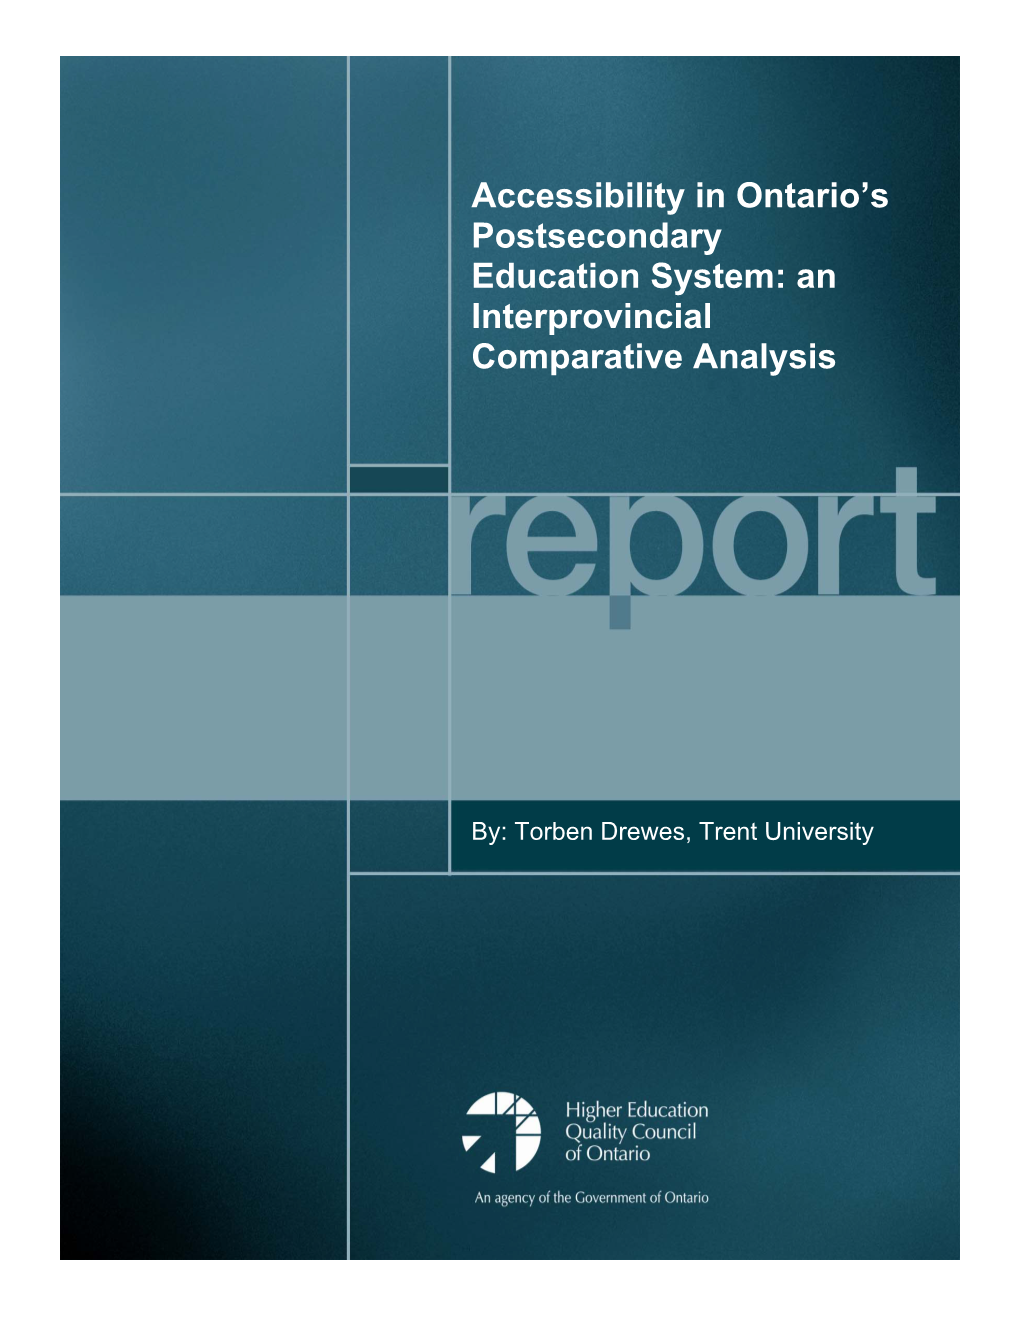 Accessibility in Ontario's Postsecondary Education System